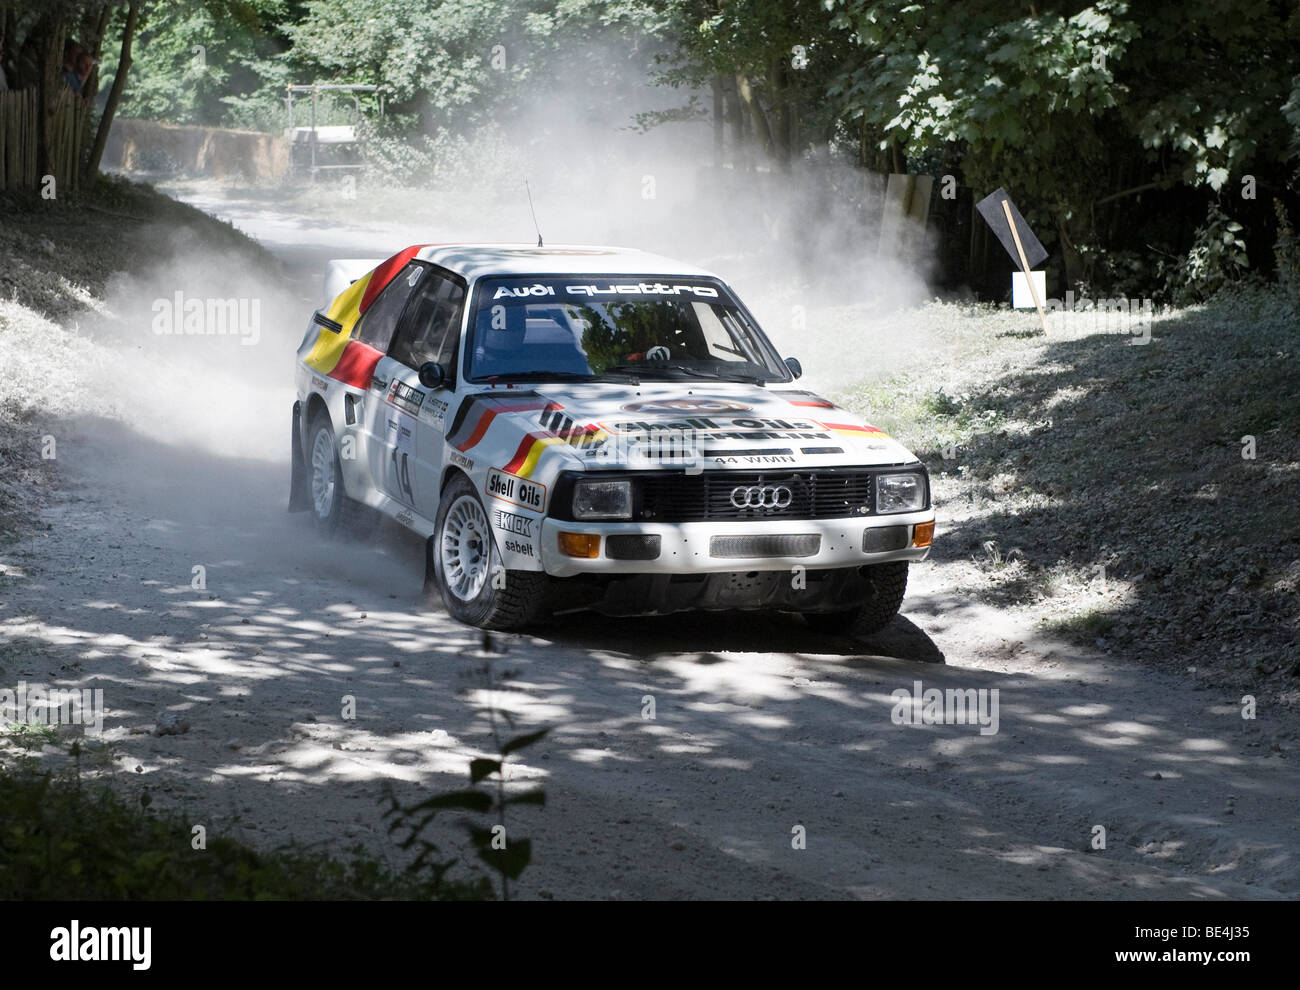 Audi Sport Quattro S1 on the rally stage at Goodwood Festival of Speed Stock Photo